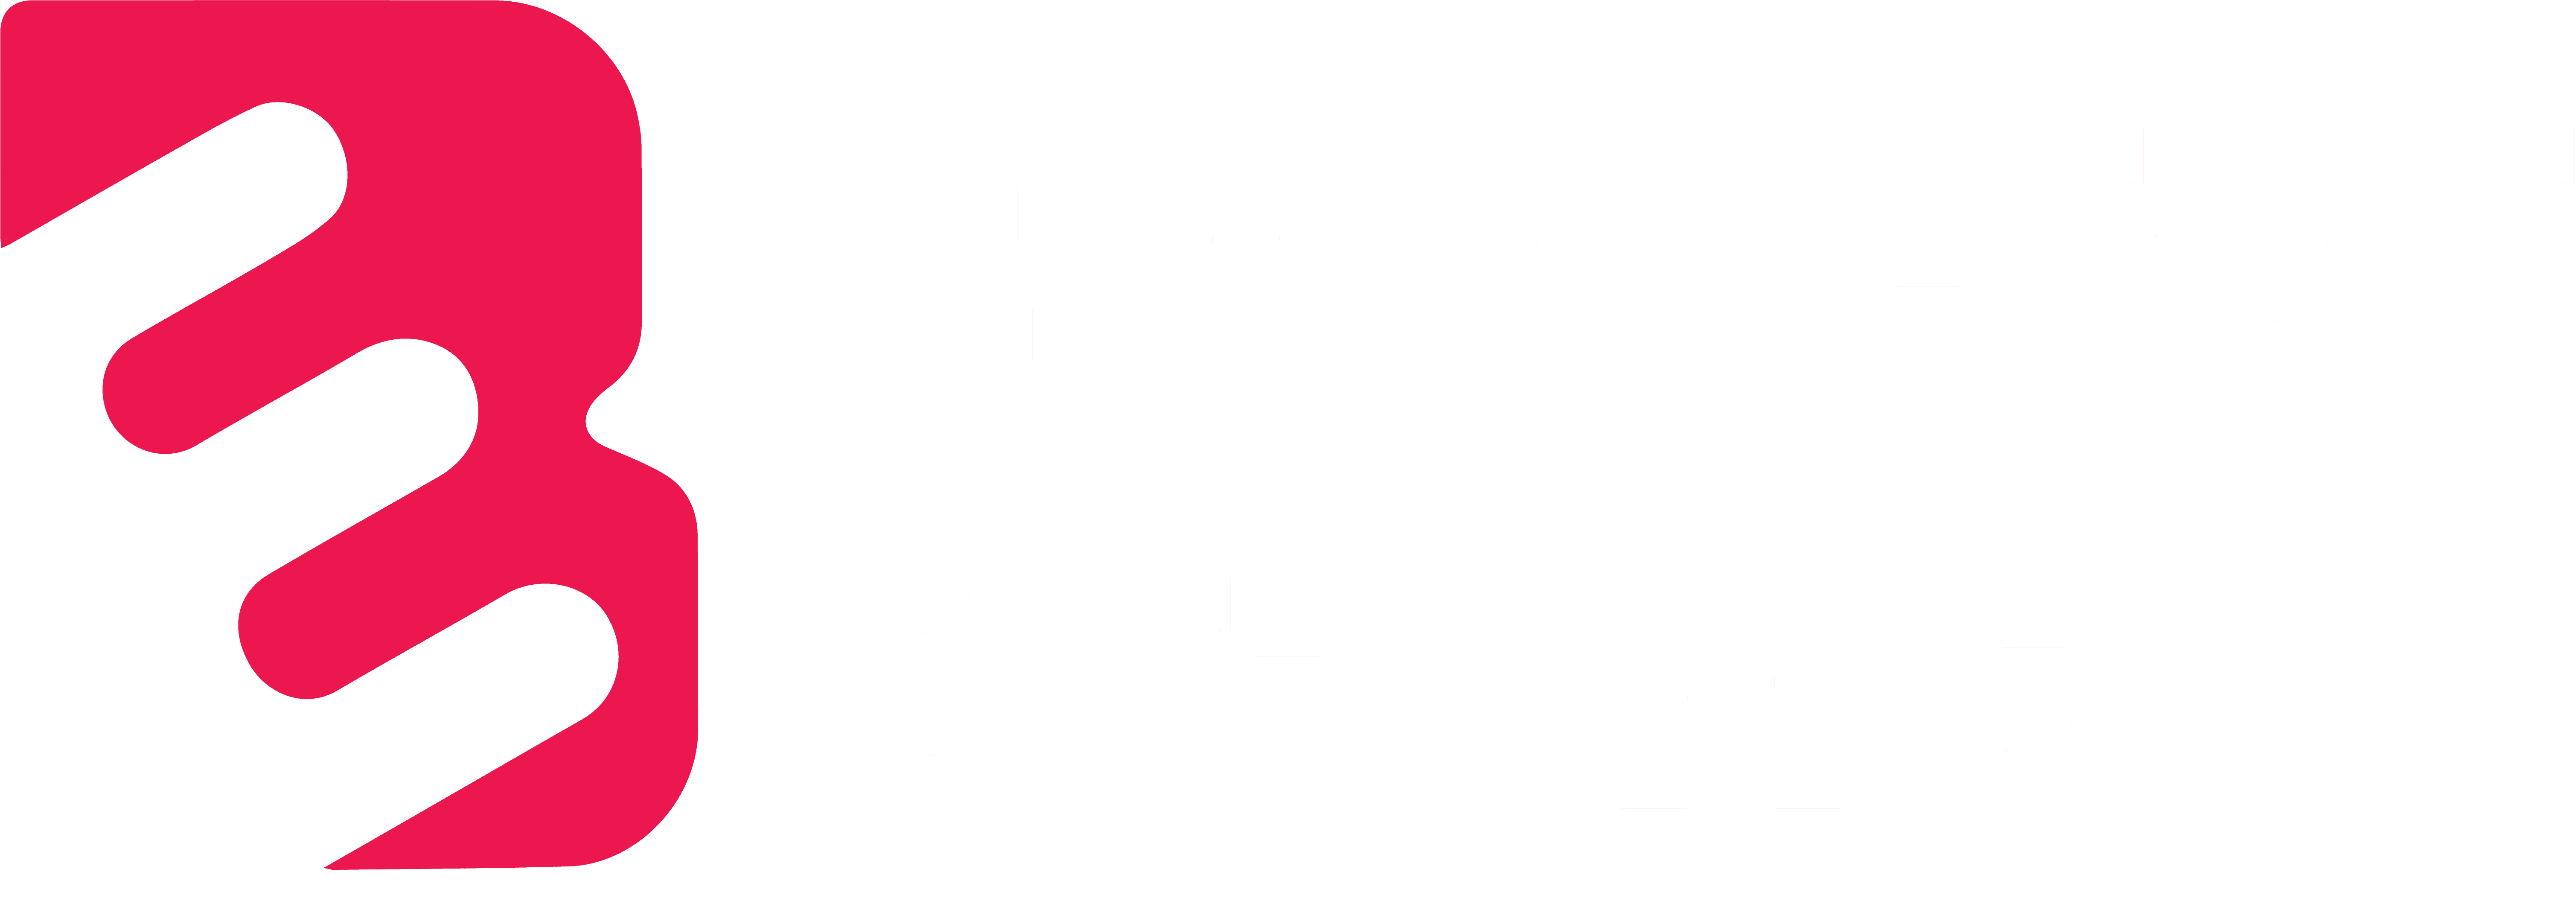 Emperor Brains Company Logo - A symbol of excellence and innovation.